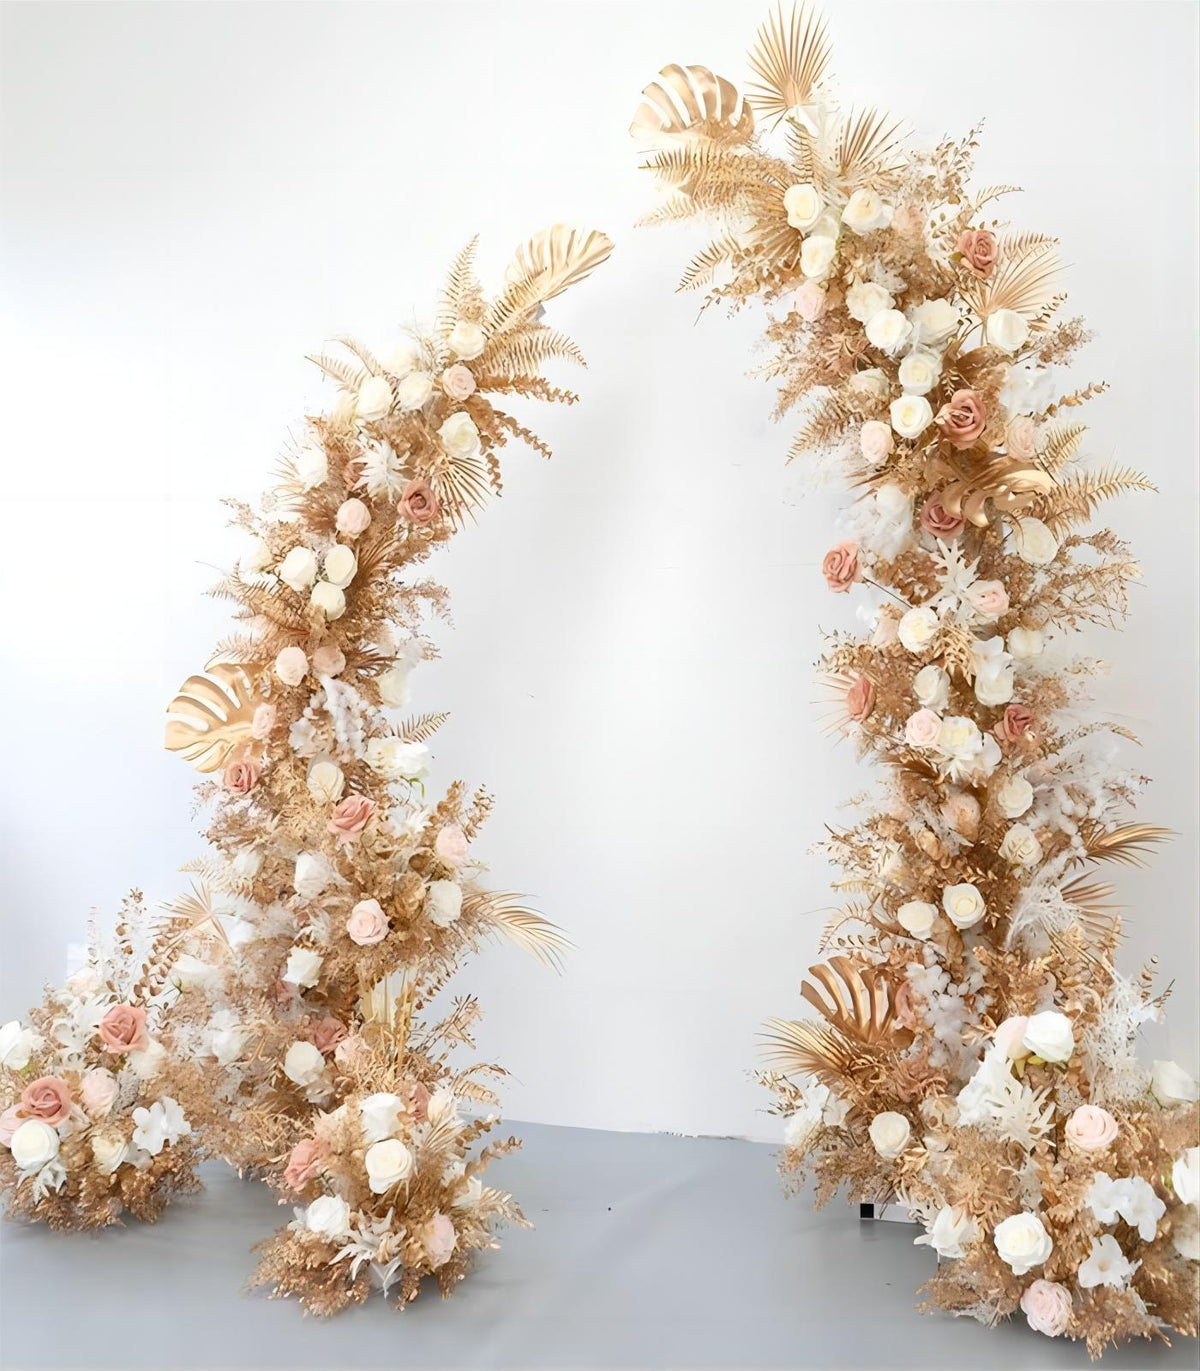 Horn Arch Gold Ivory Rose Eucalyptus Artificial Flower Wedding Party Birthday Backdrop Decor CH9621